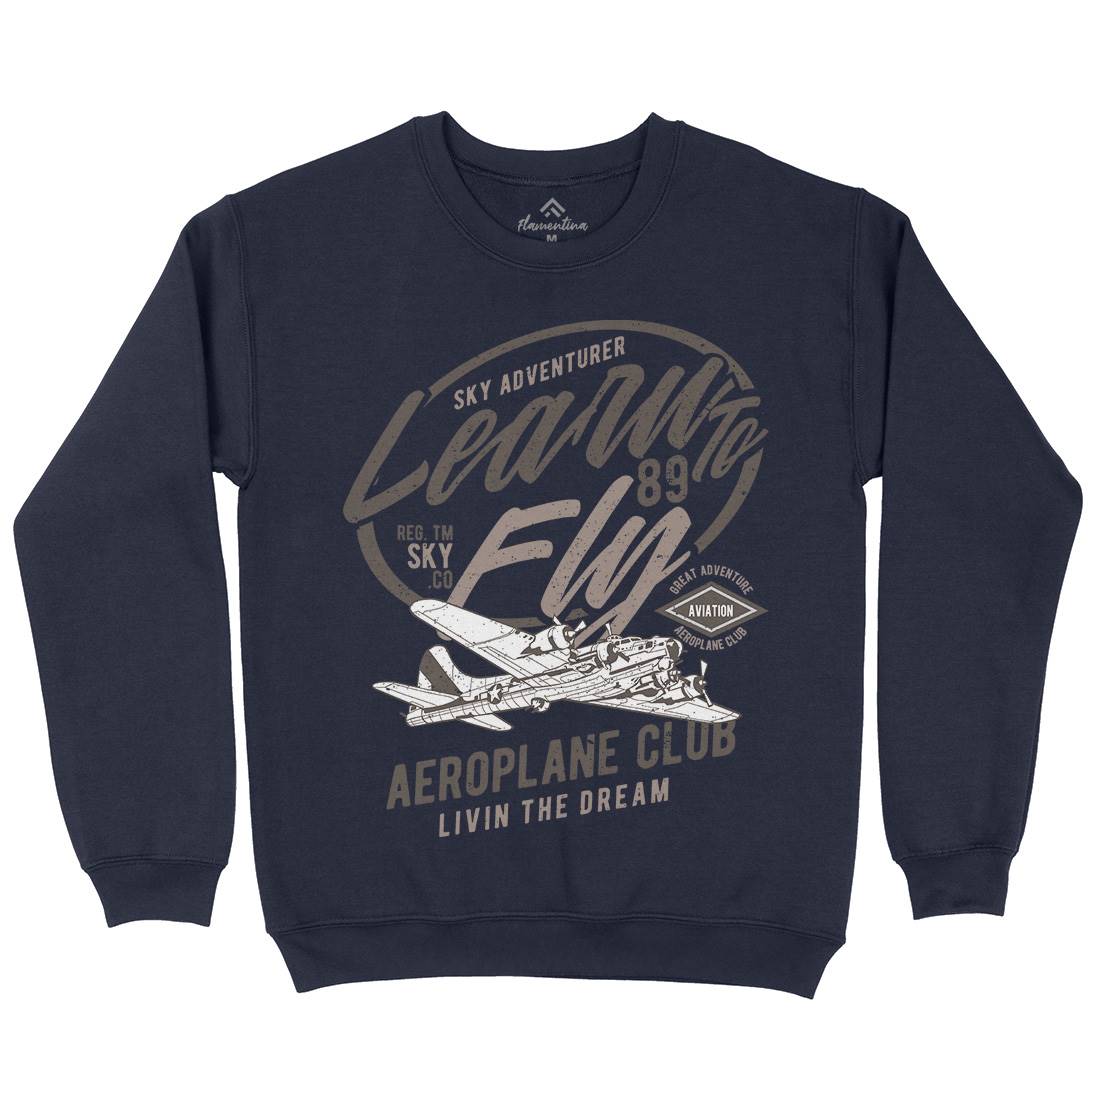 Learn To Fly Kids Crew Neck Sweatshirt Vehicles A704